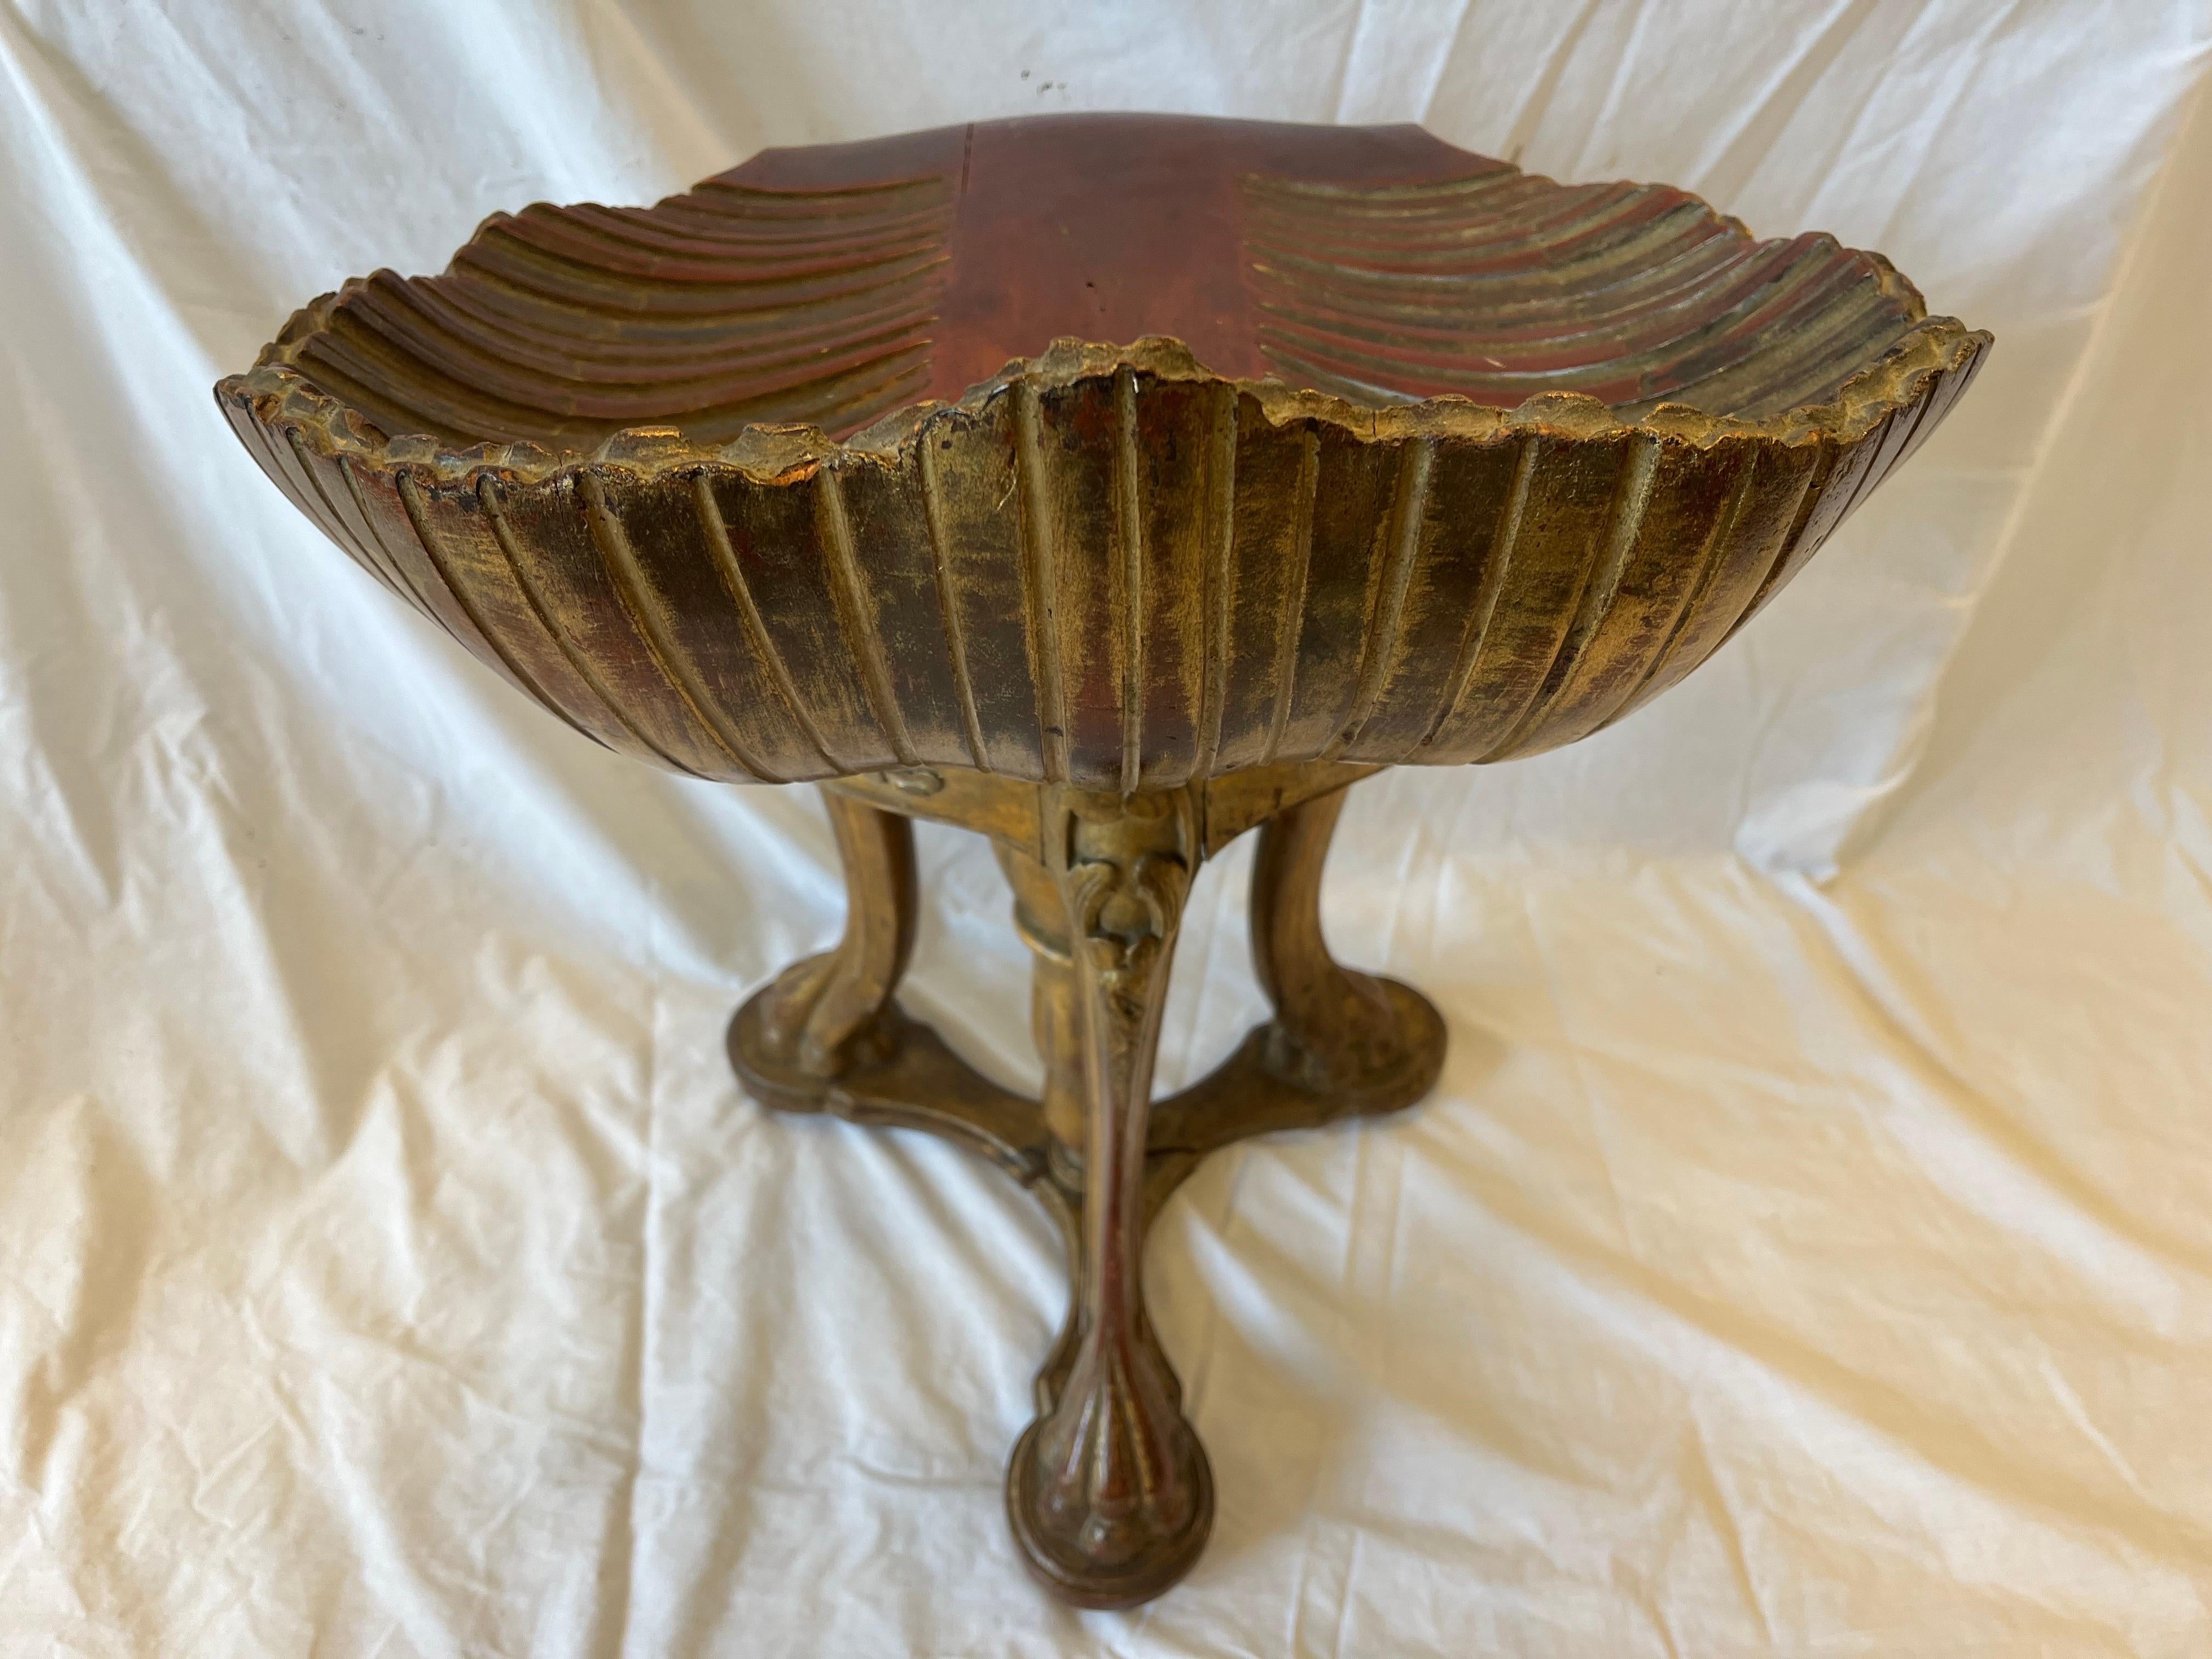 Polychromed Antique Venetian Italian Grotto Piano Stool Carved Gold Gilt Shell Rocaille Seat